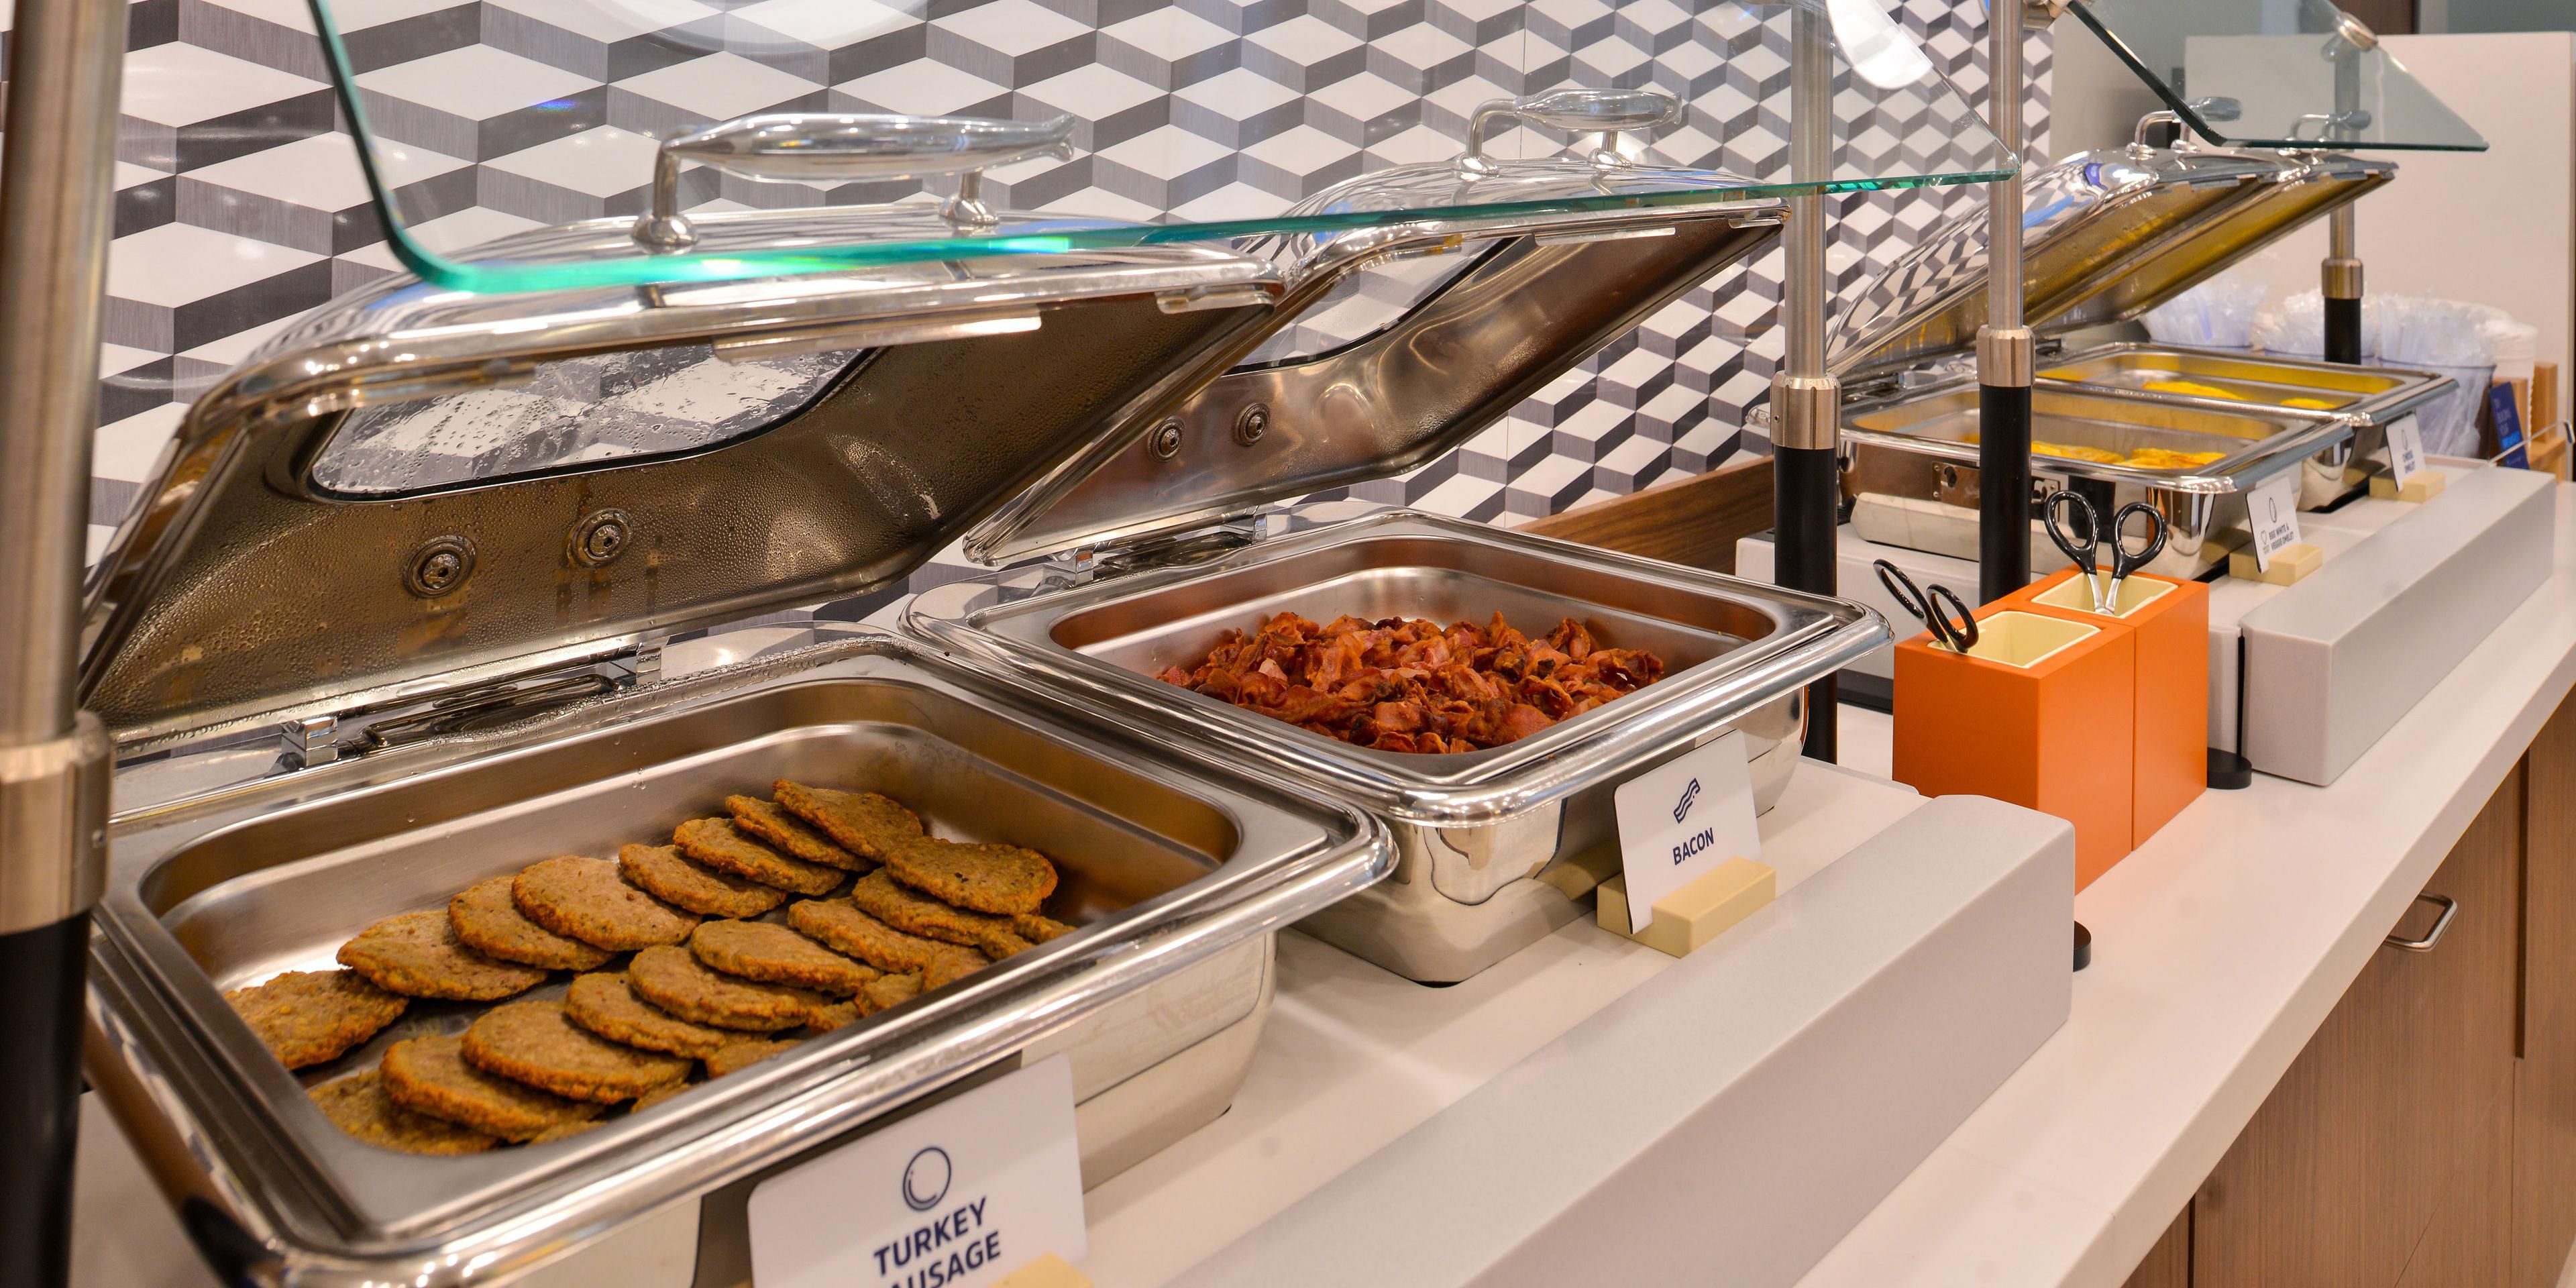 Stay and enjoy our hot breakfast buffet to fuel you for your day!